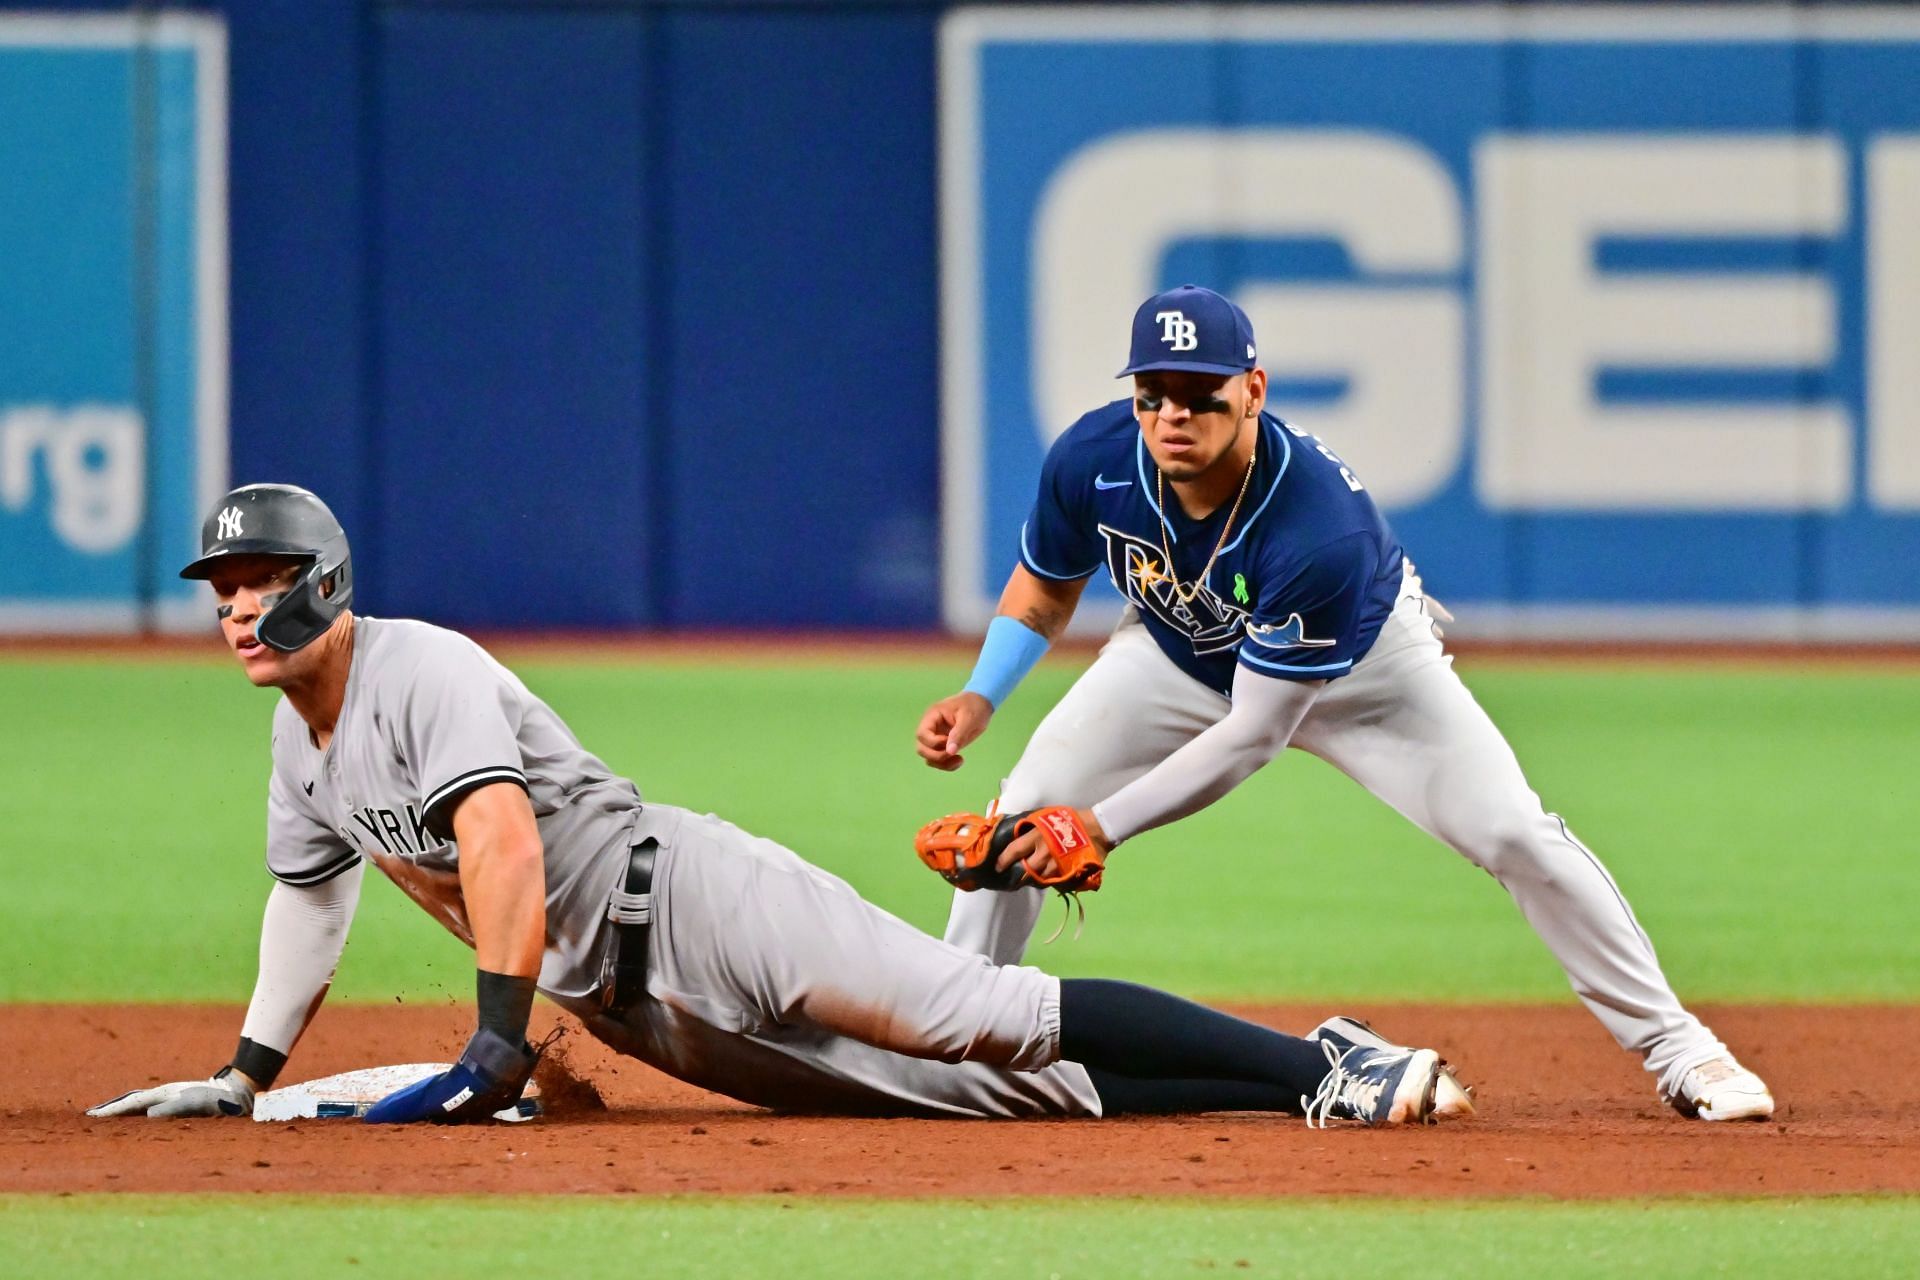 The Yankees take on the Rays Friday at Tropicana Field.